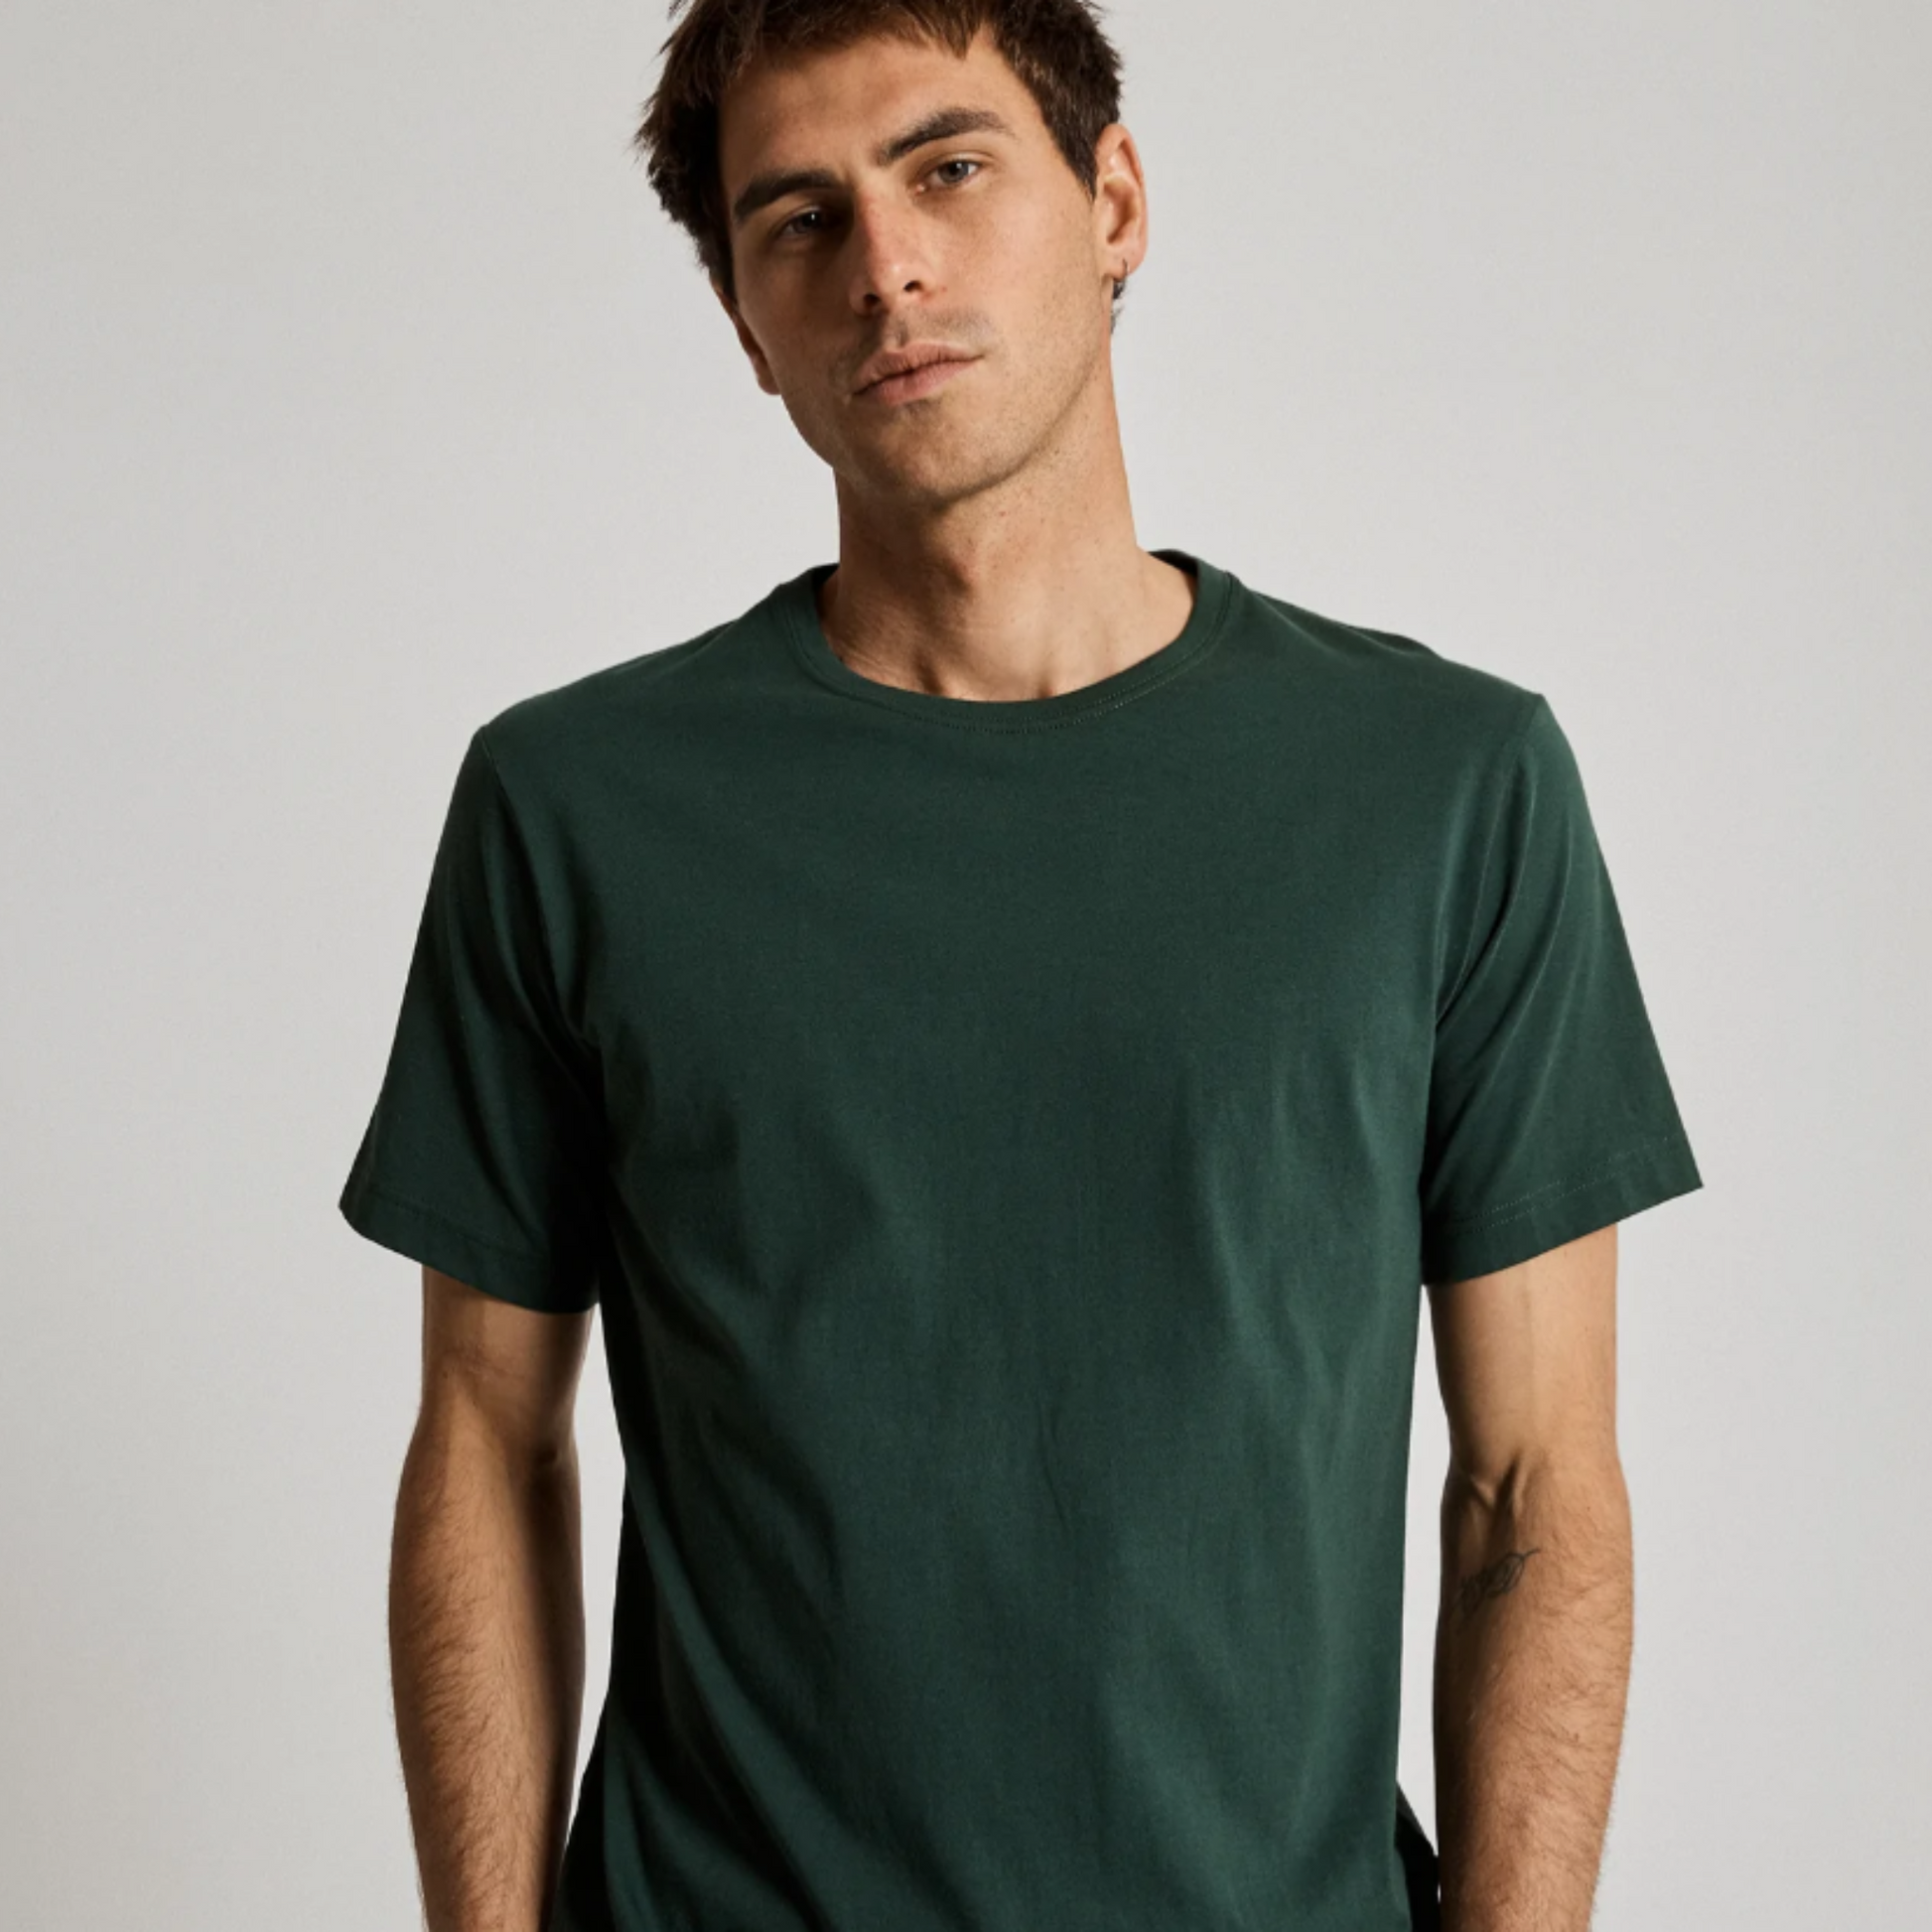 The Bottle Green Reginald tee is the foundation of the Mr Simple collection. A perfect everyday t-shirt that you'll love to wear day after day.